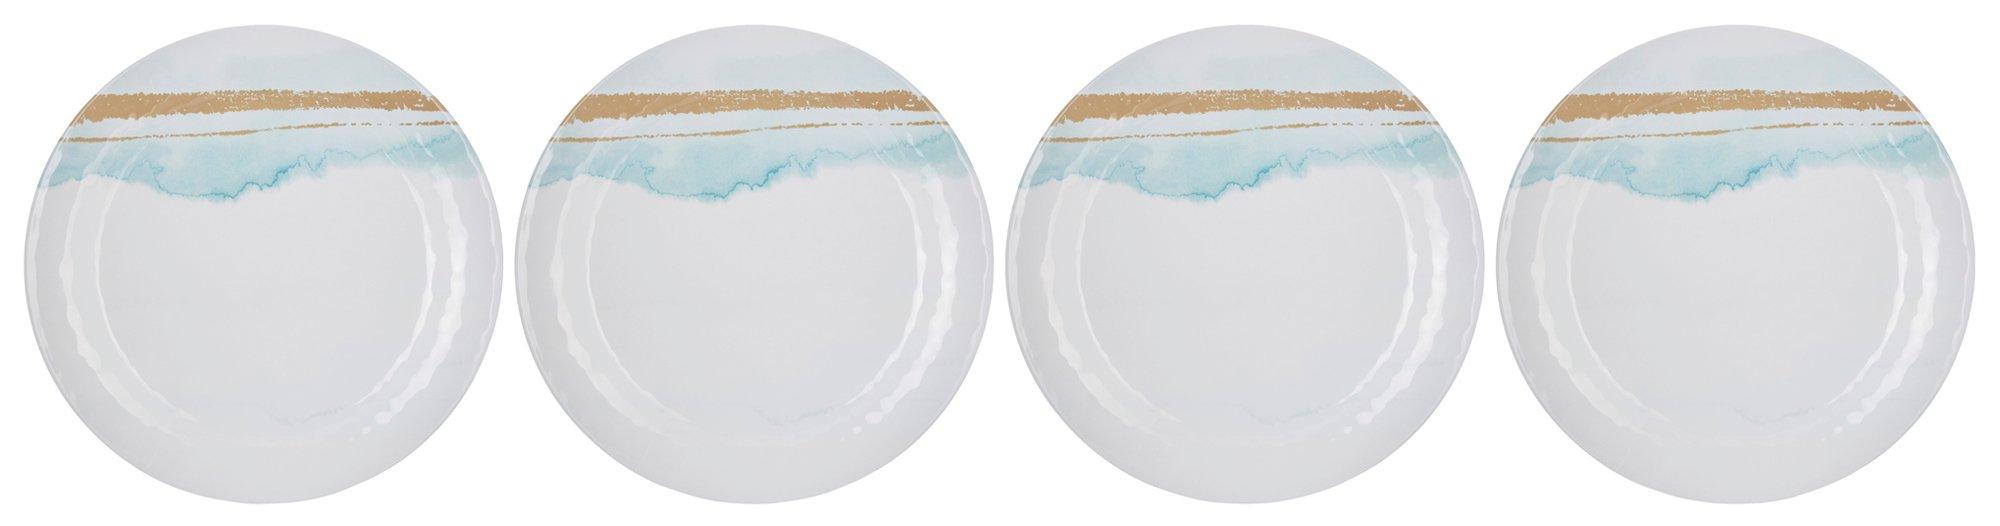 4 Pc Natural Elements Dinner Plate Set